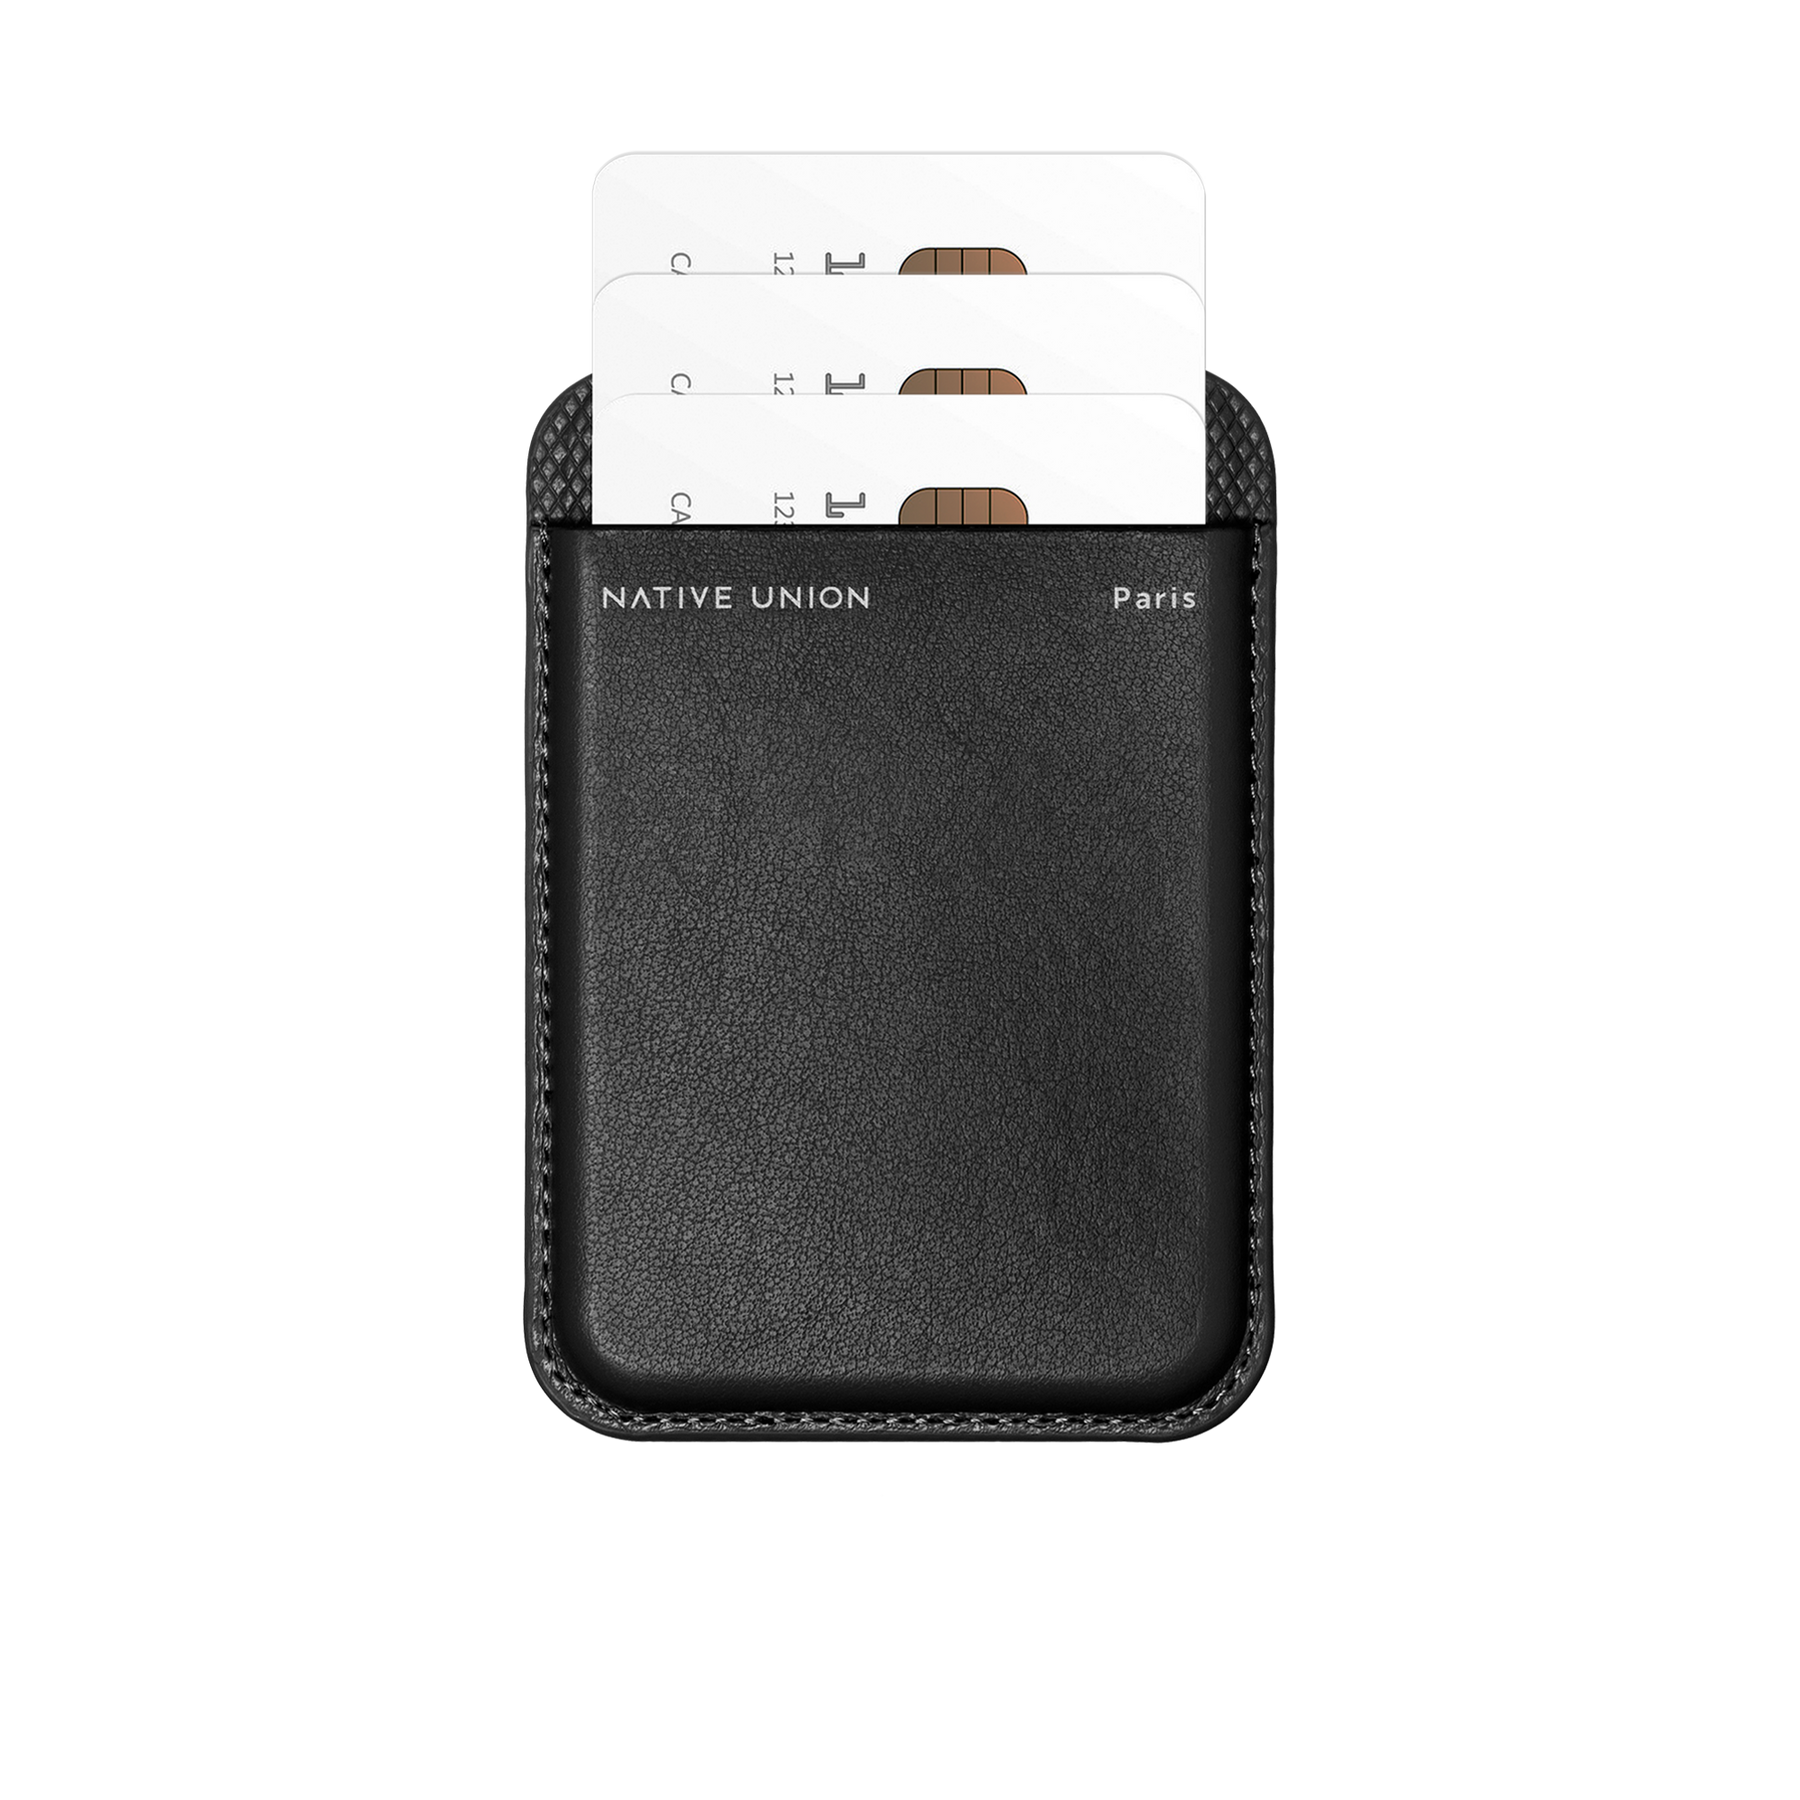 Card Holder & Wallet Combination, Compact & Multifunctional Ultra